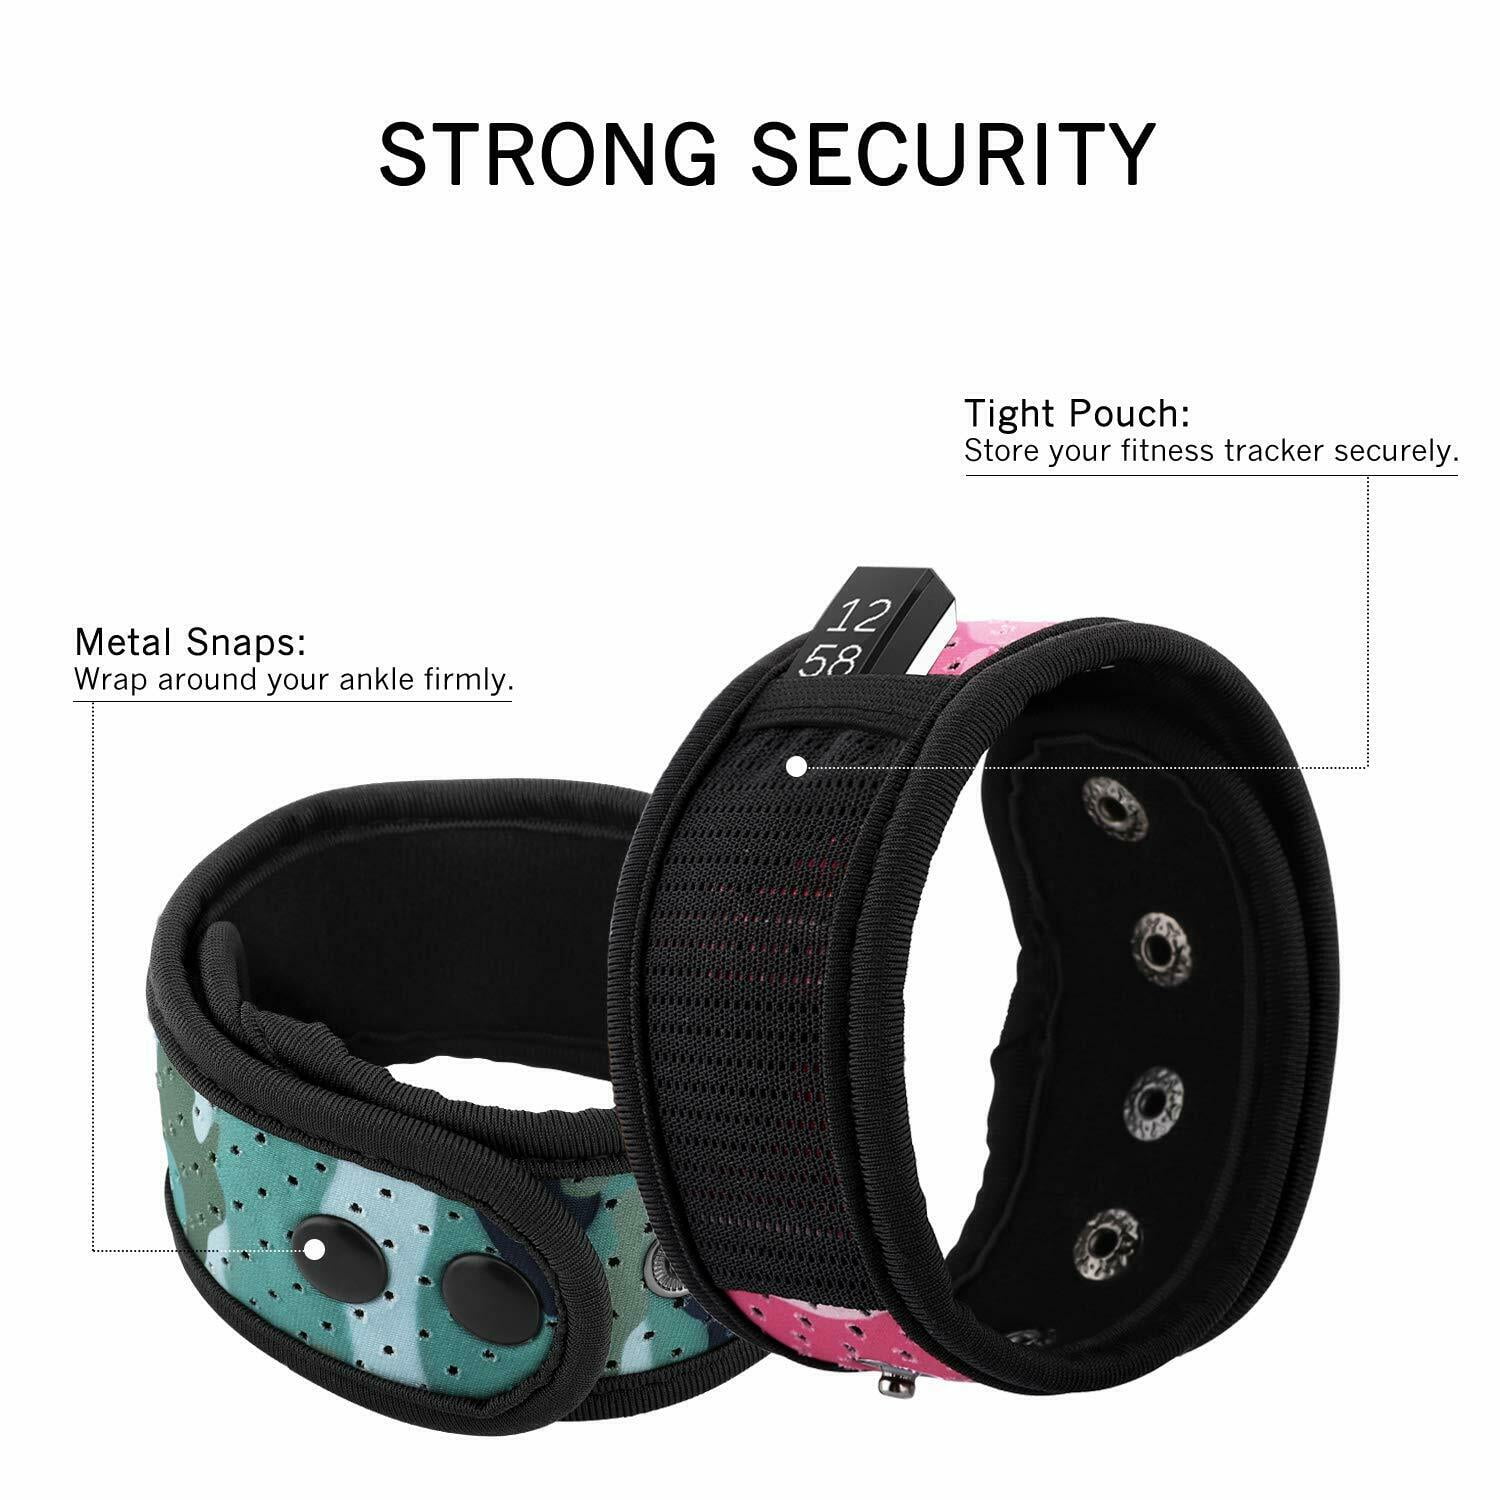 MoKo 2Pack Sweatproof Fitness Tracker Ankle Band Wristband for Fitbit Flex/Alta 